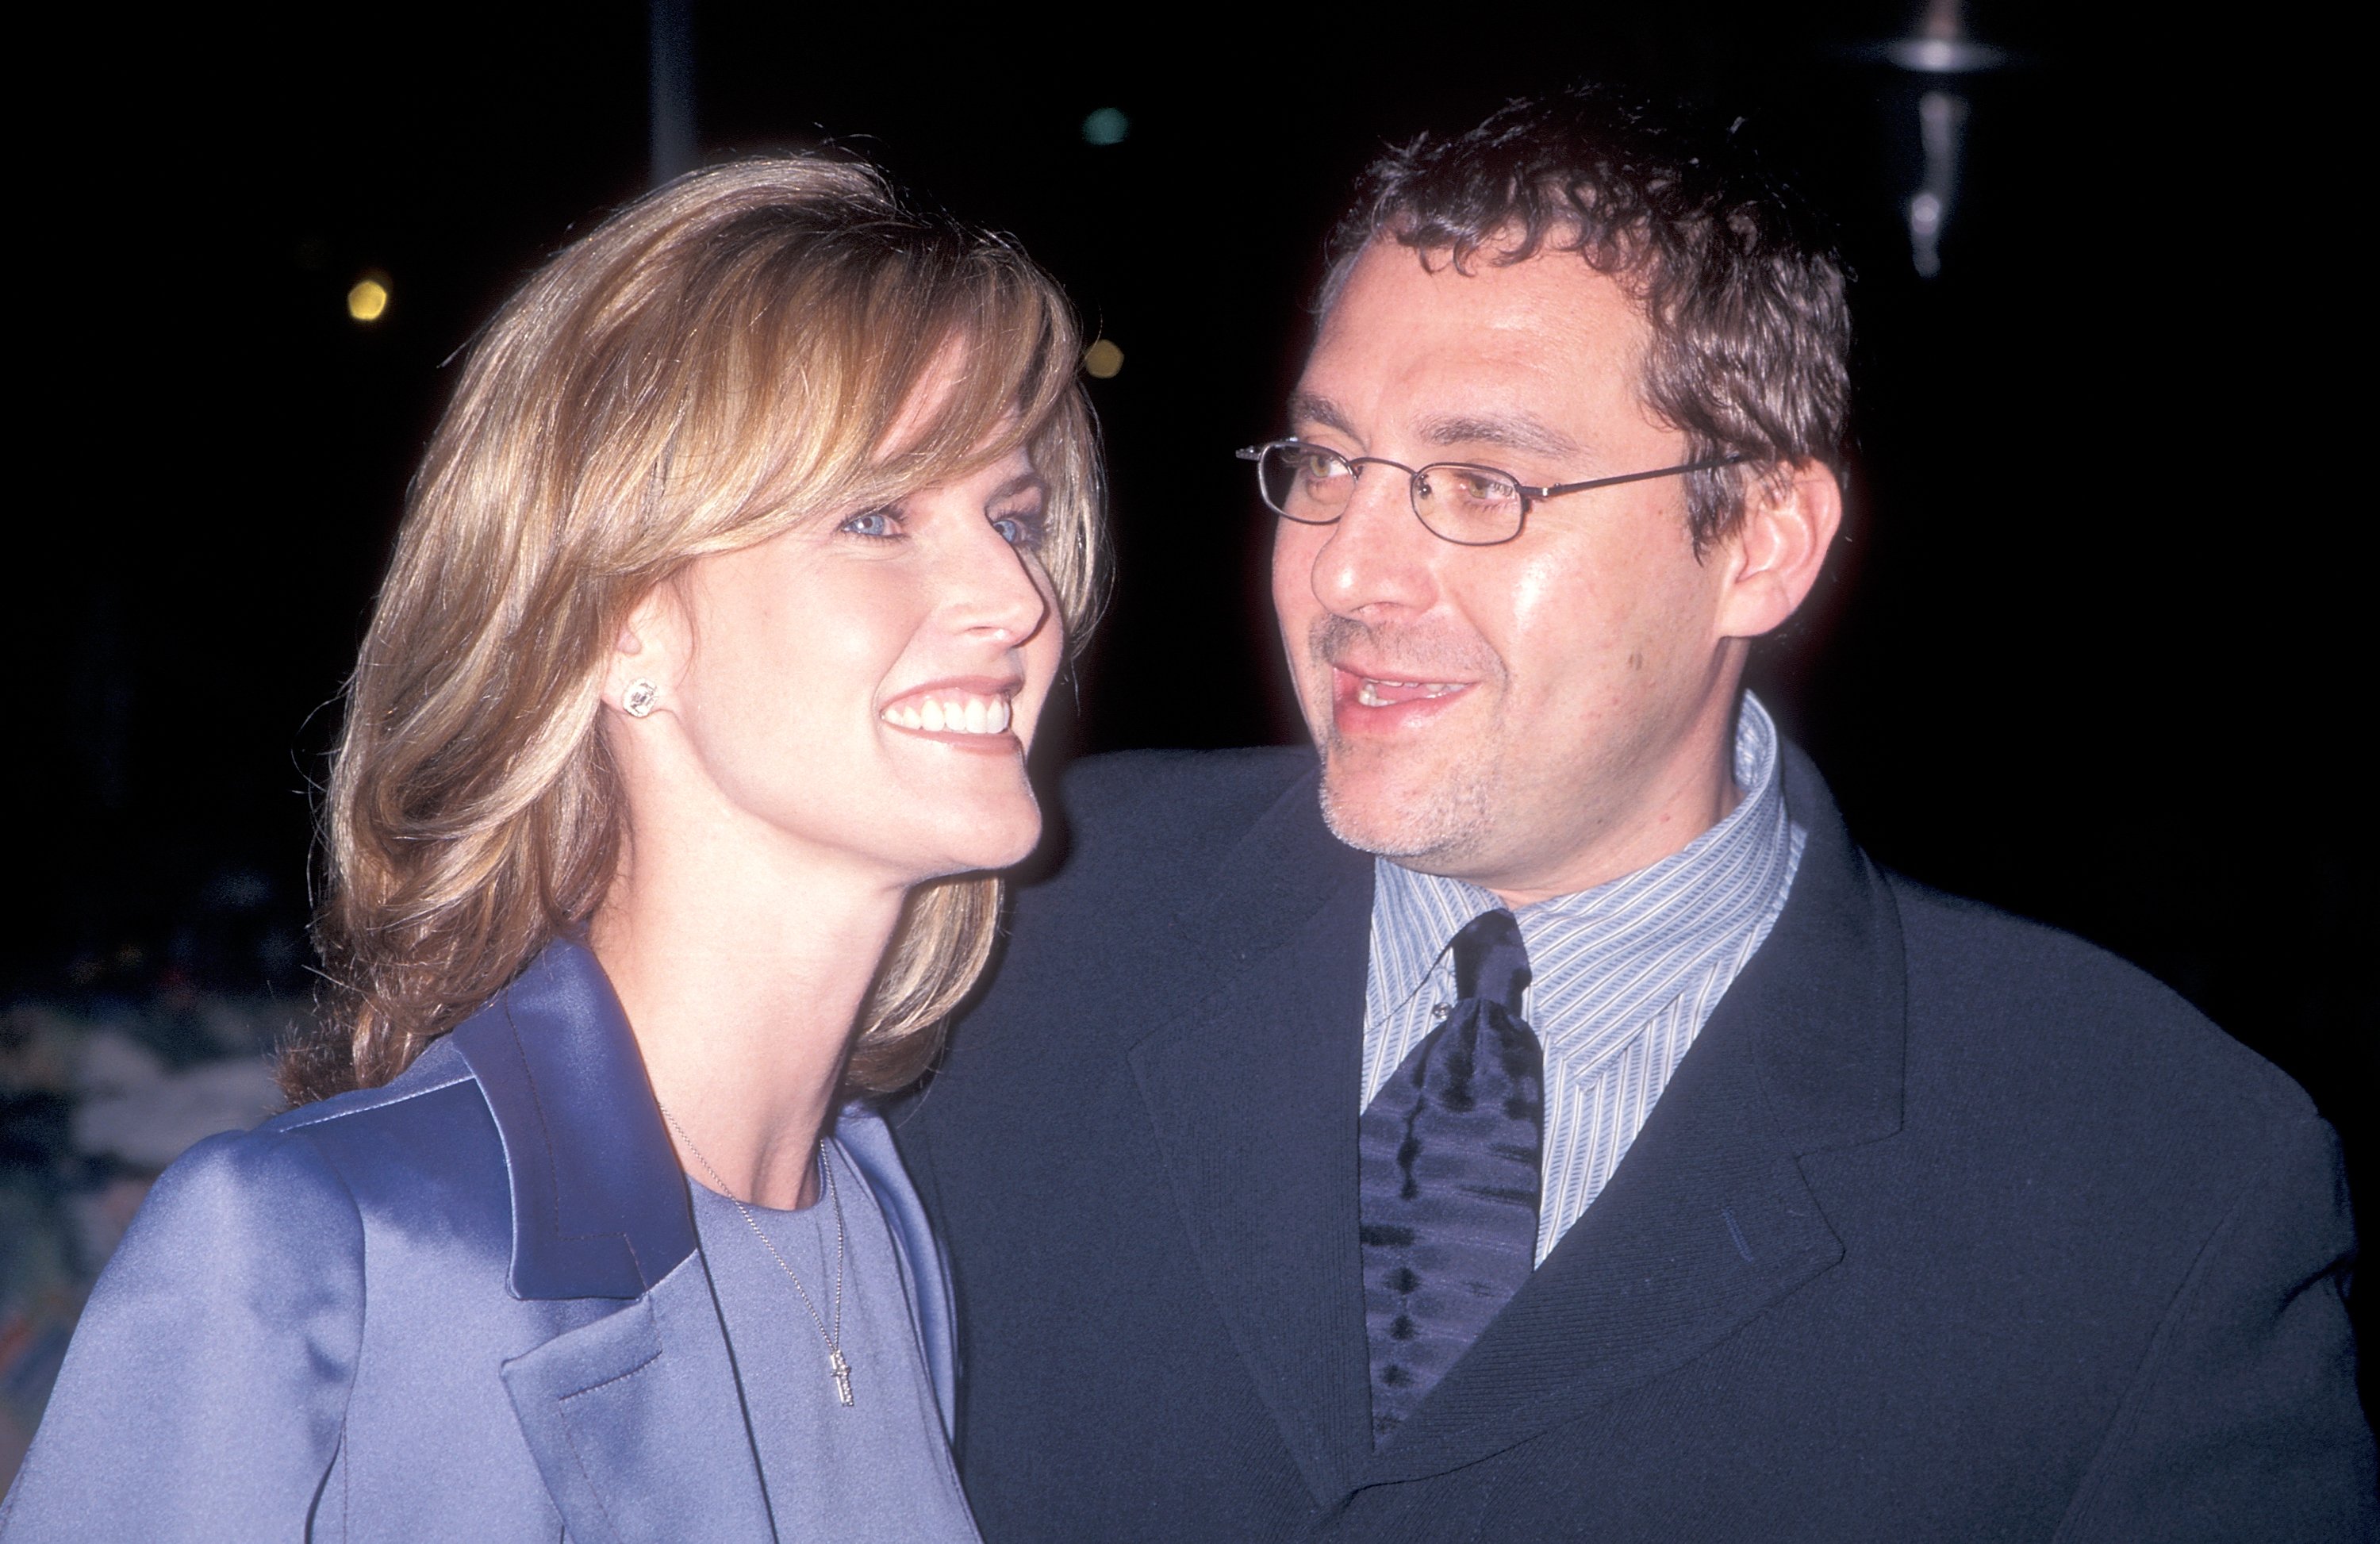 Tom Sizemore and Maeve Quinlan at "The Relic" premiere at Paramount Studios in Hollywood, California, on January 8, 1997. | Source: Getty Images